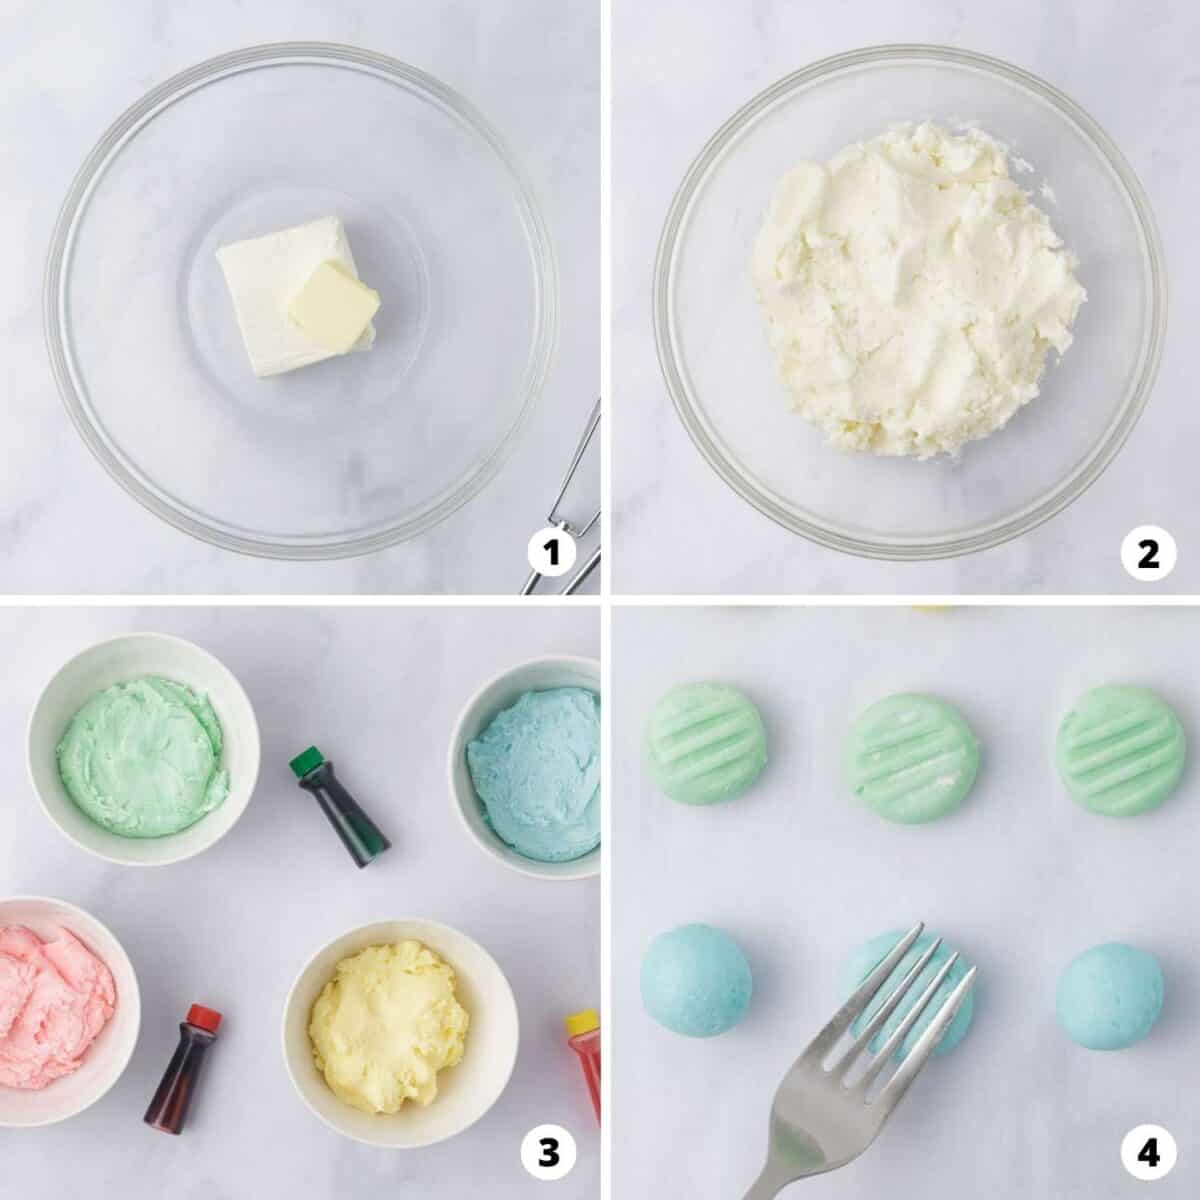 Showing how to make cream cheese mints in a 4 step collage.